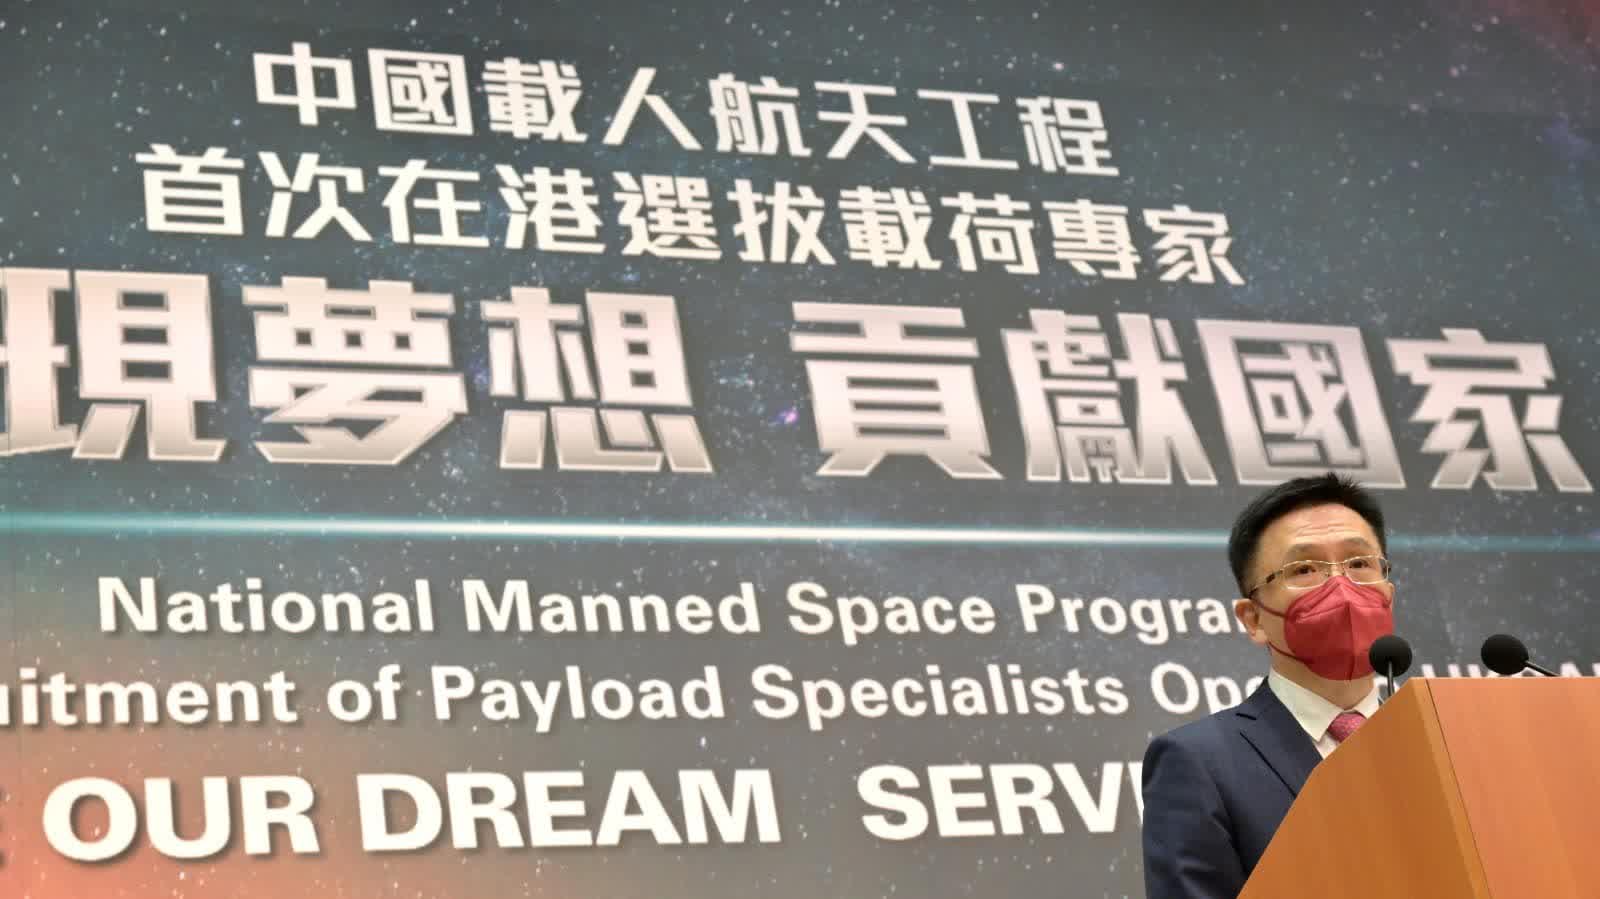 Several HongKongers qualified for final selection round for nation's space program